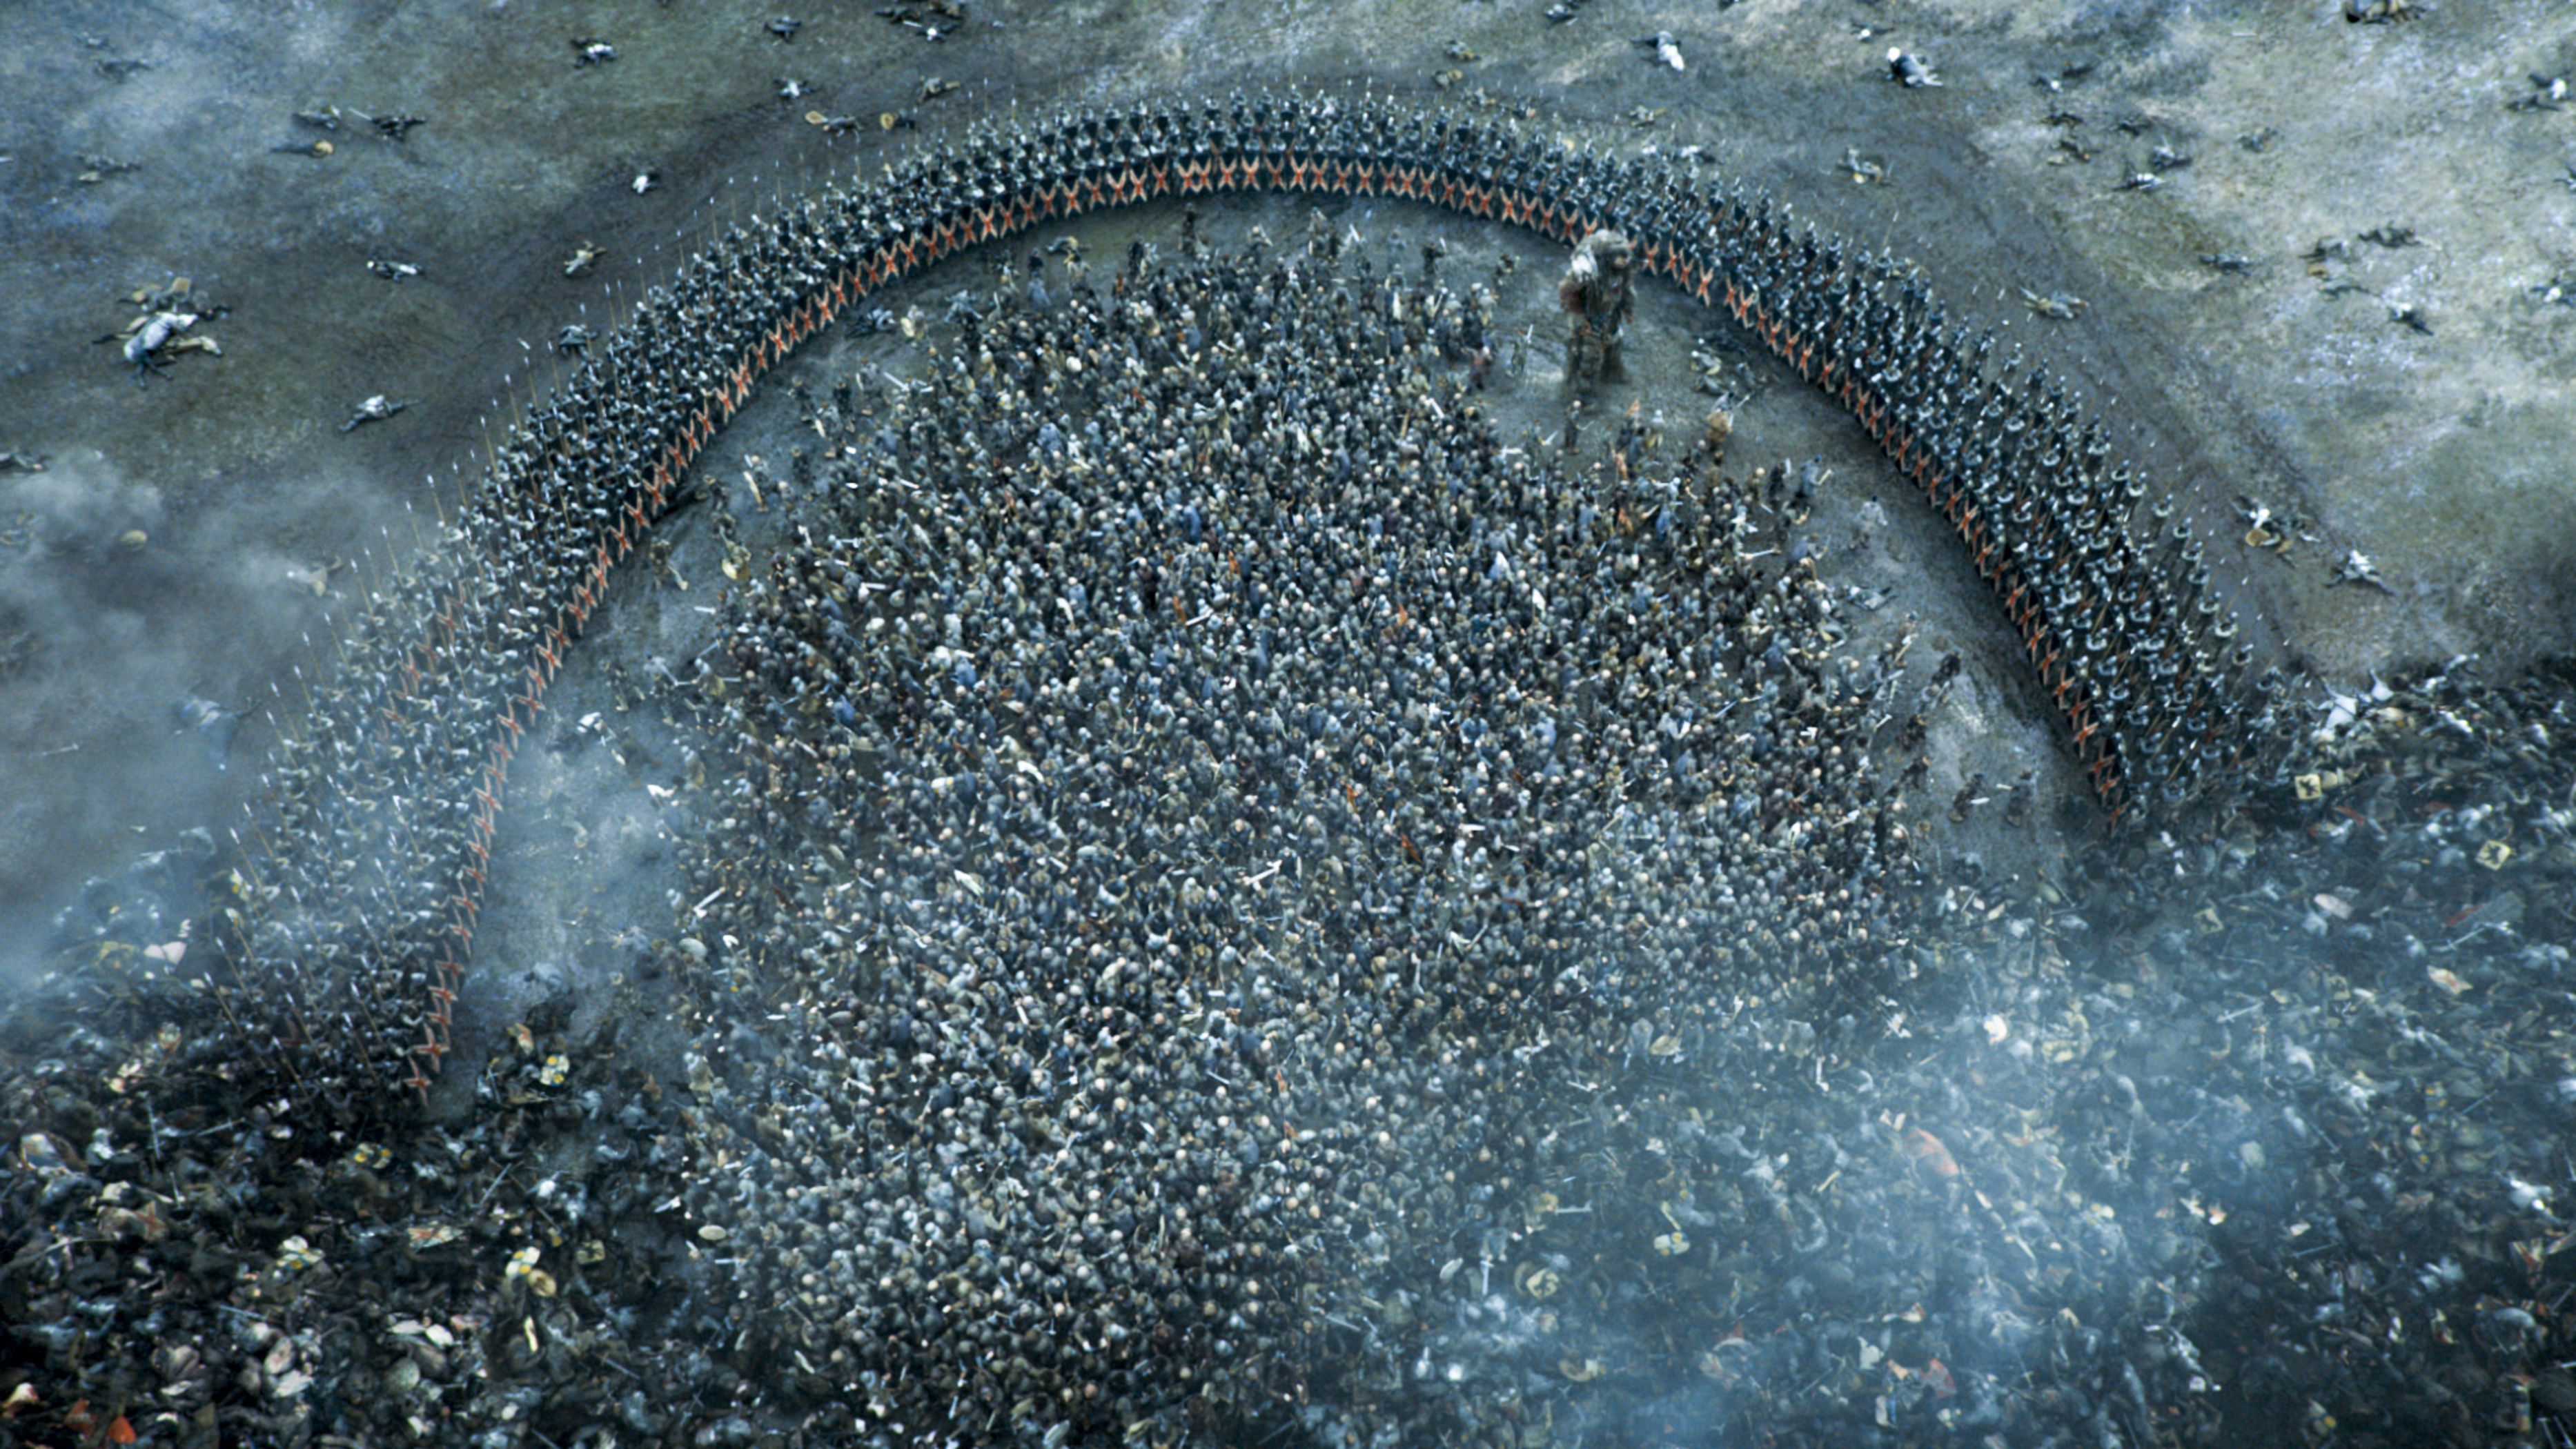 game-of-thrones-battle-of-the-bastards-image